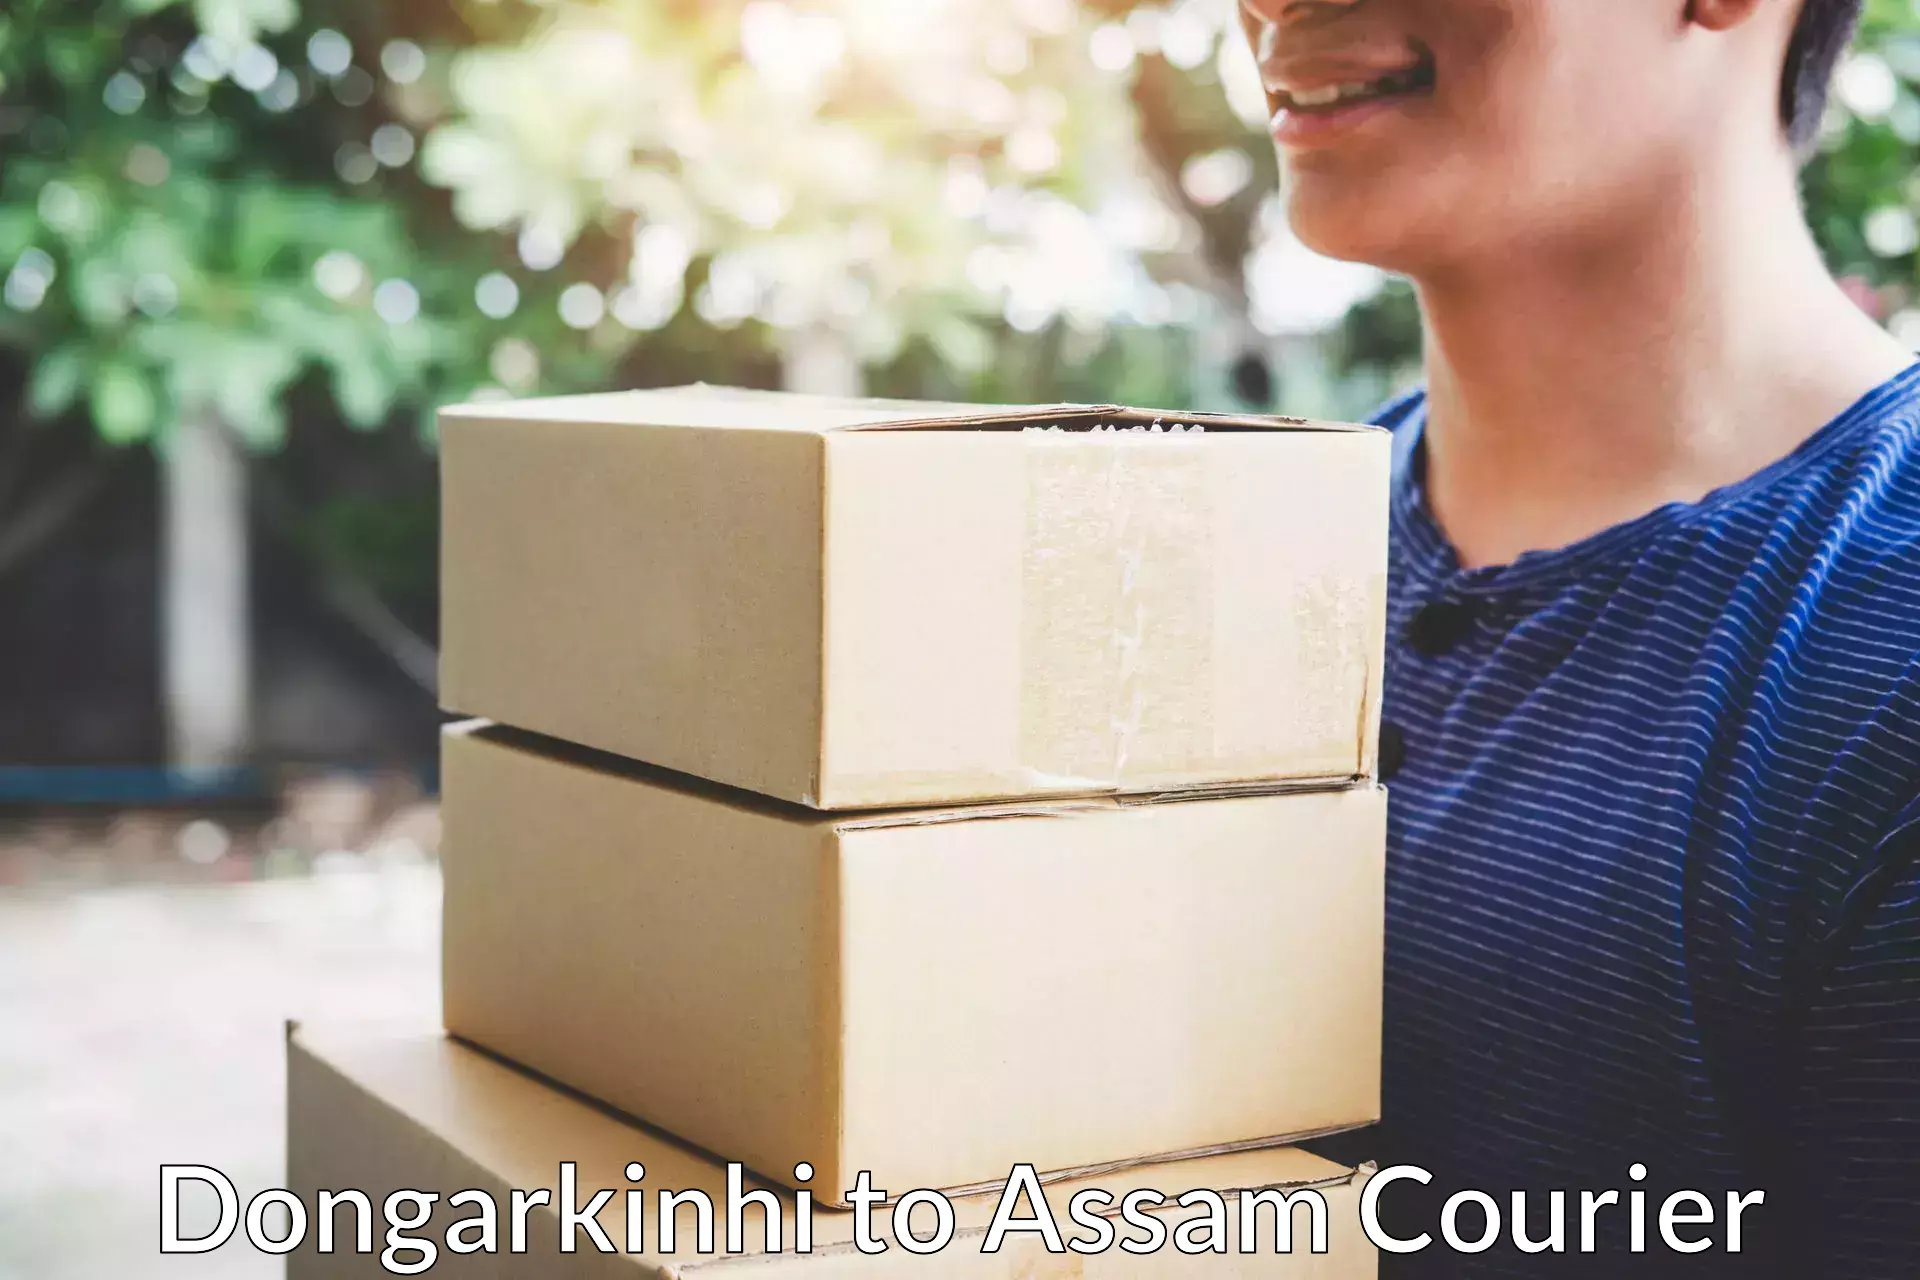 Quality relocation assistance Dongarkinhi to Assam